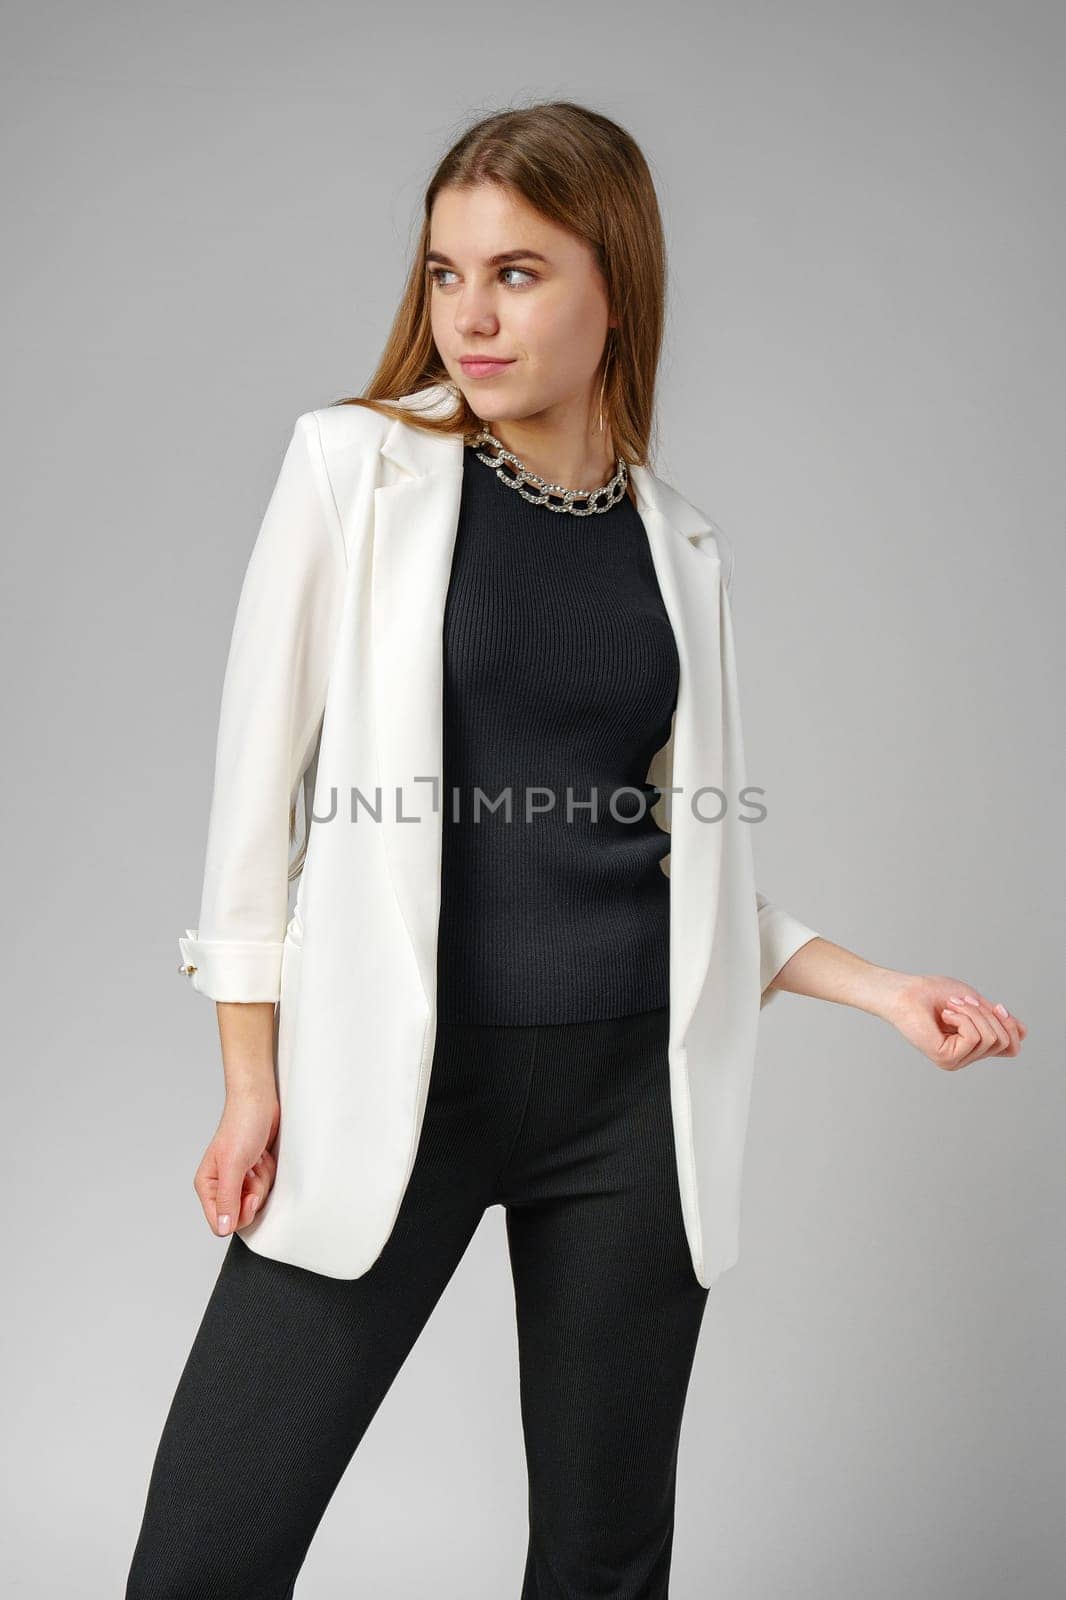 Woman in Black Top and White Jacket Posing in Studio by Fabrikasimf